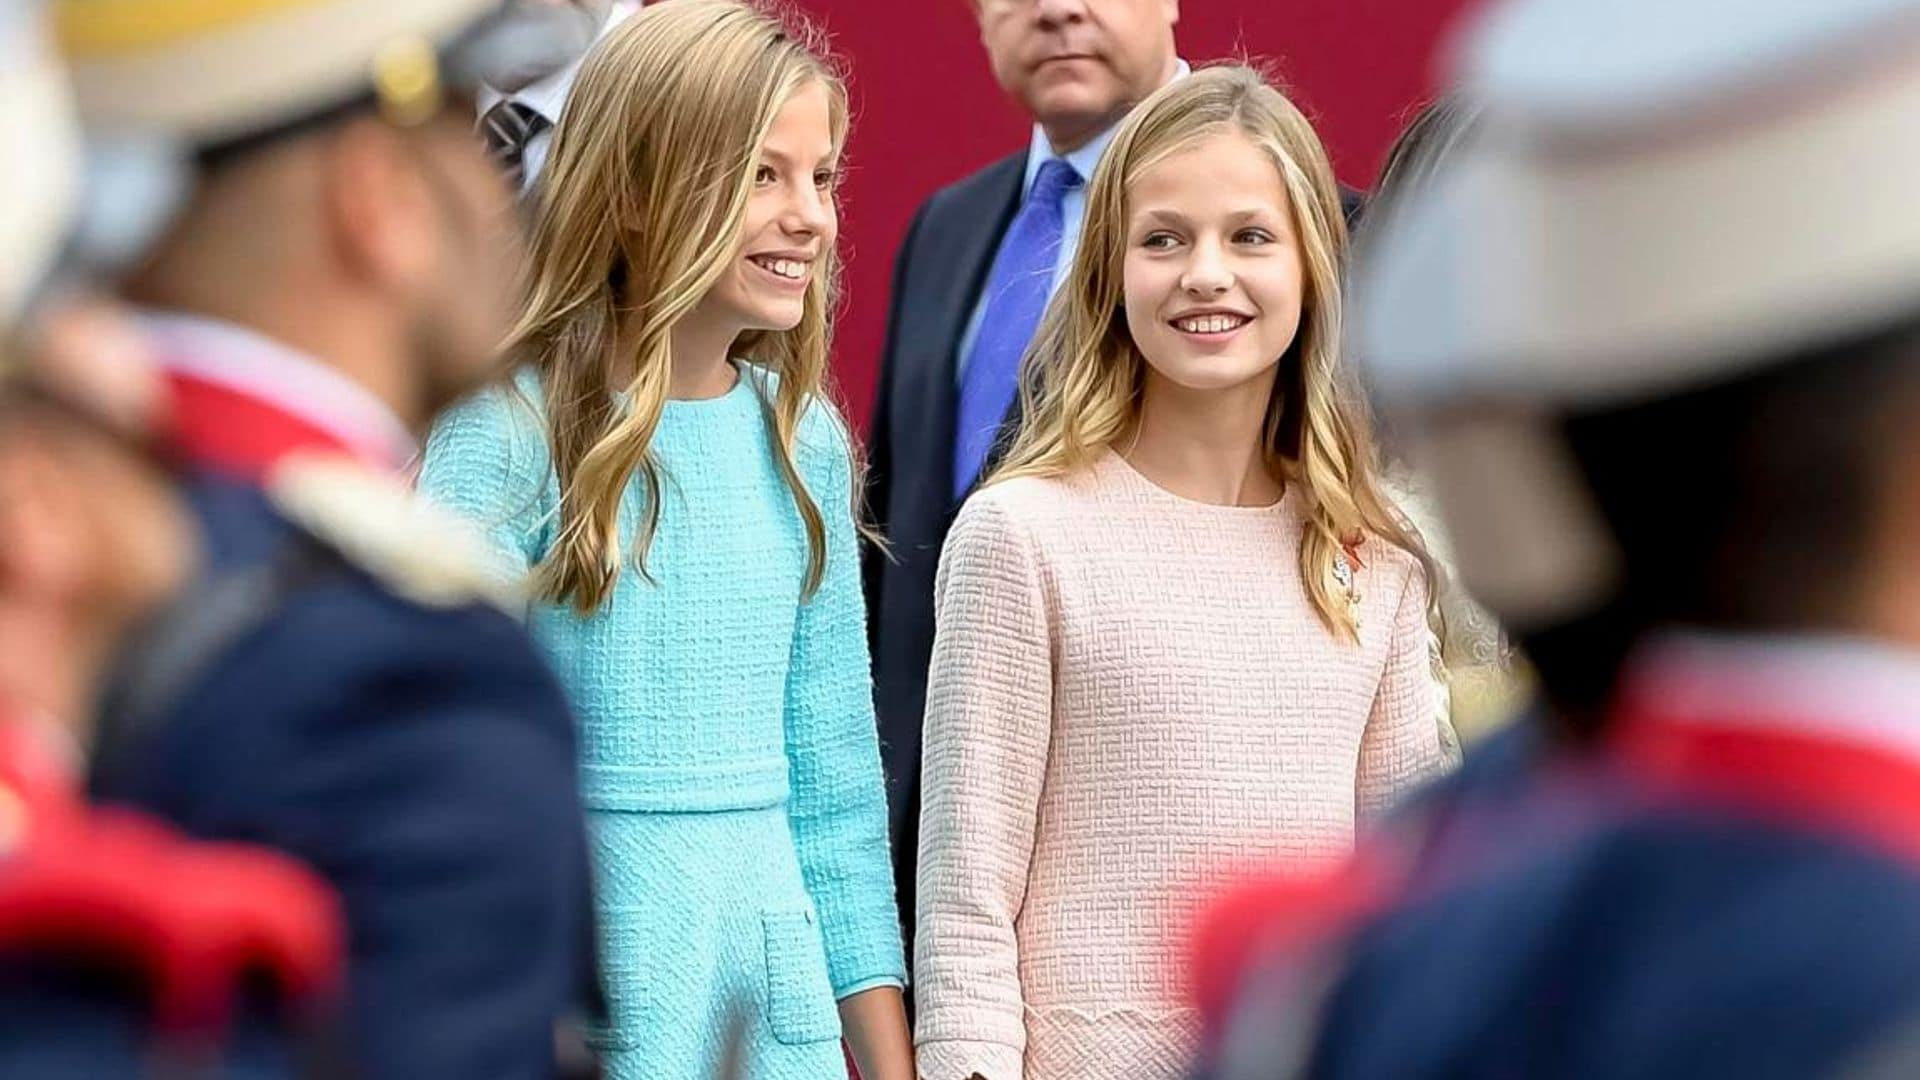 Queen Letizia’s daughters Princess Leonor and Princess Sofia, royal sisters with different styles